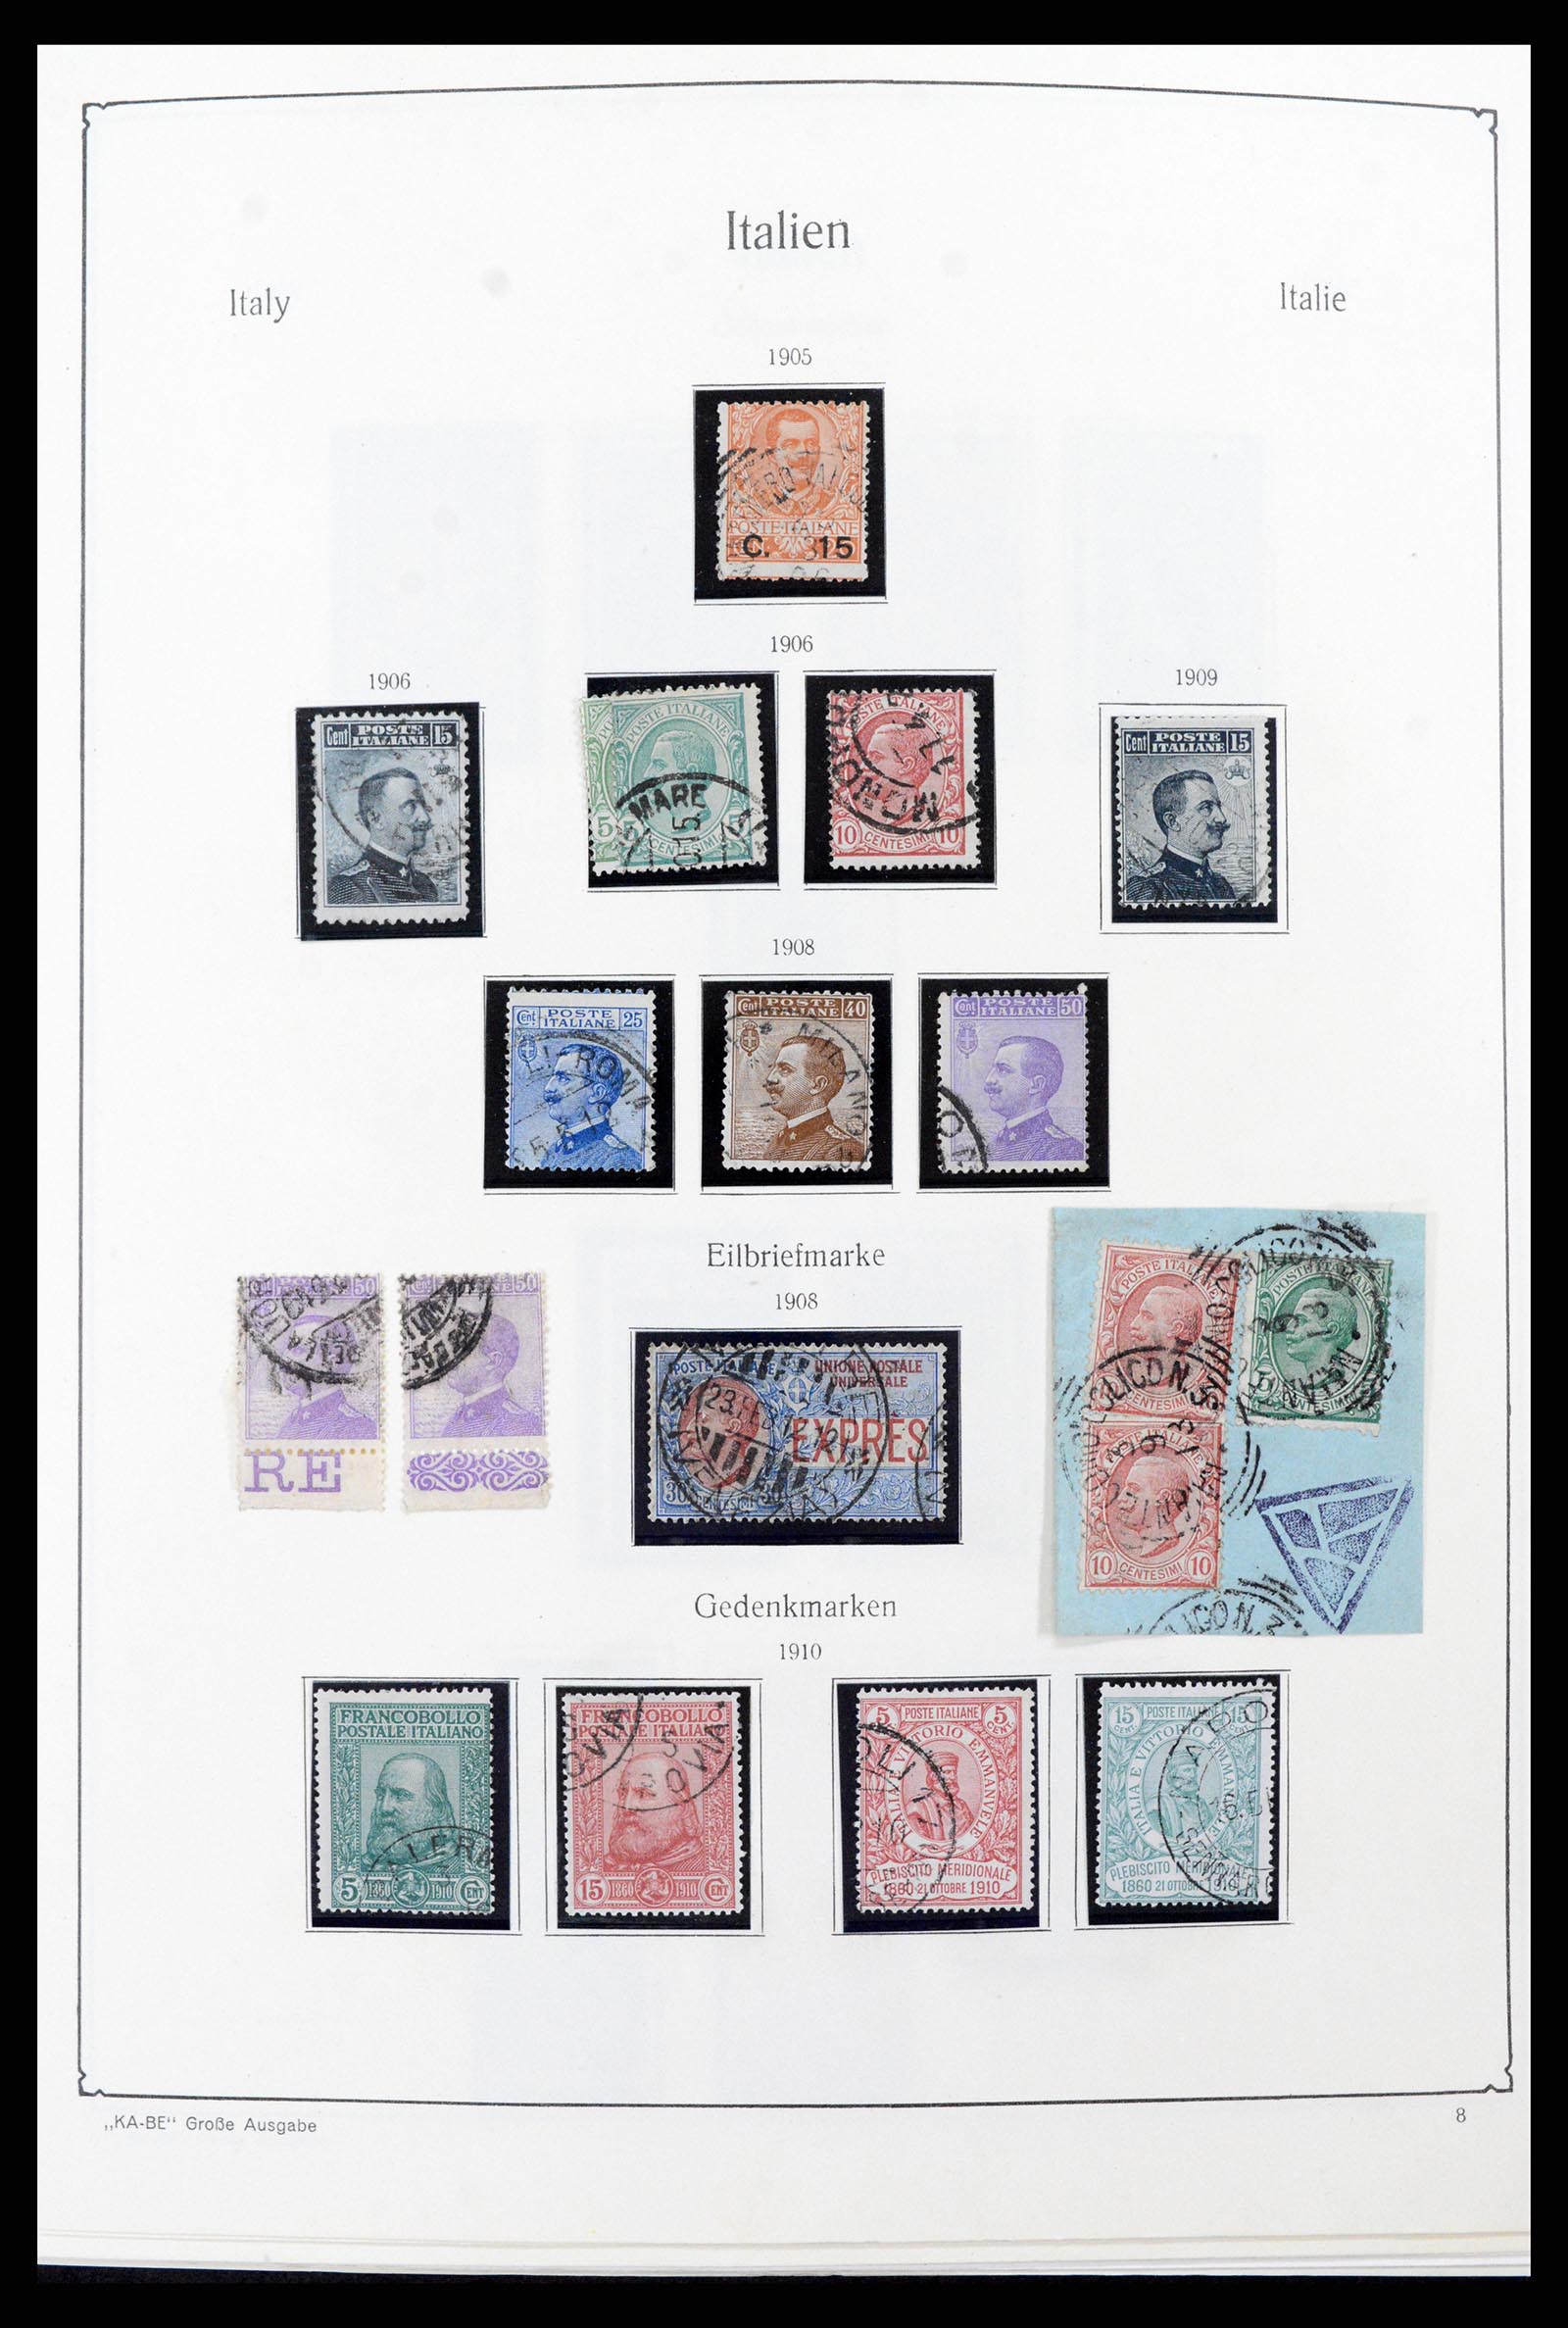 37605 019 - Stamp collection 37605 Italy and States 1855-1974.